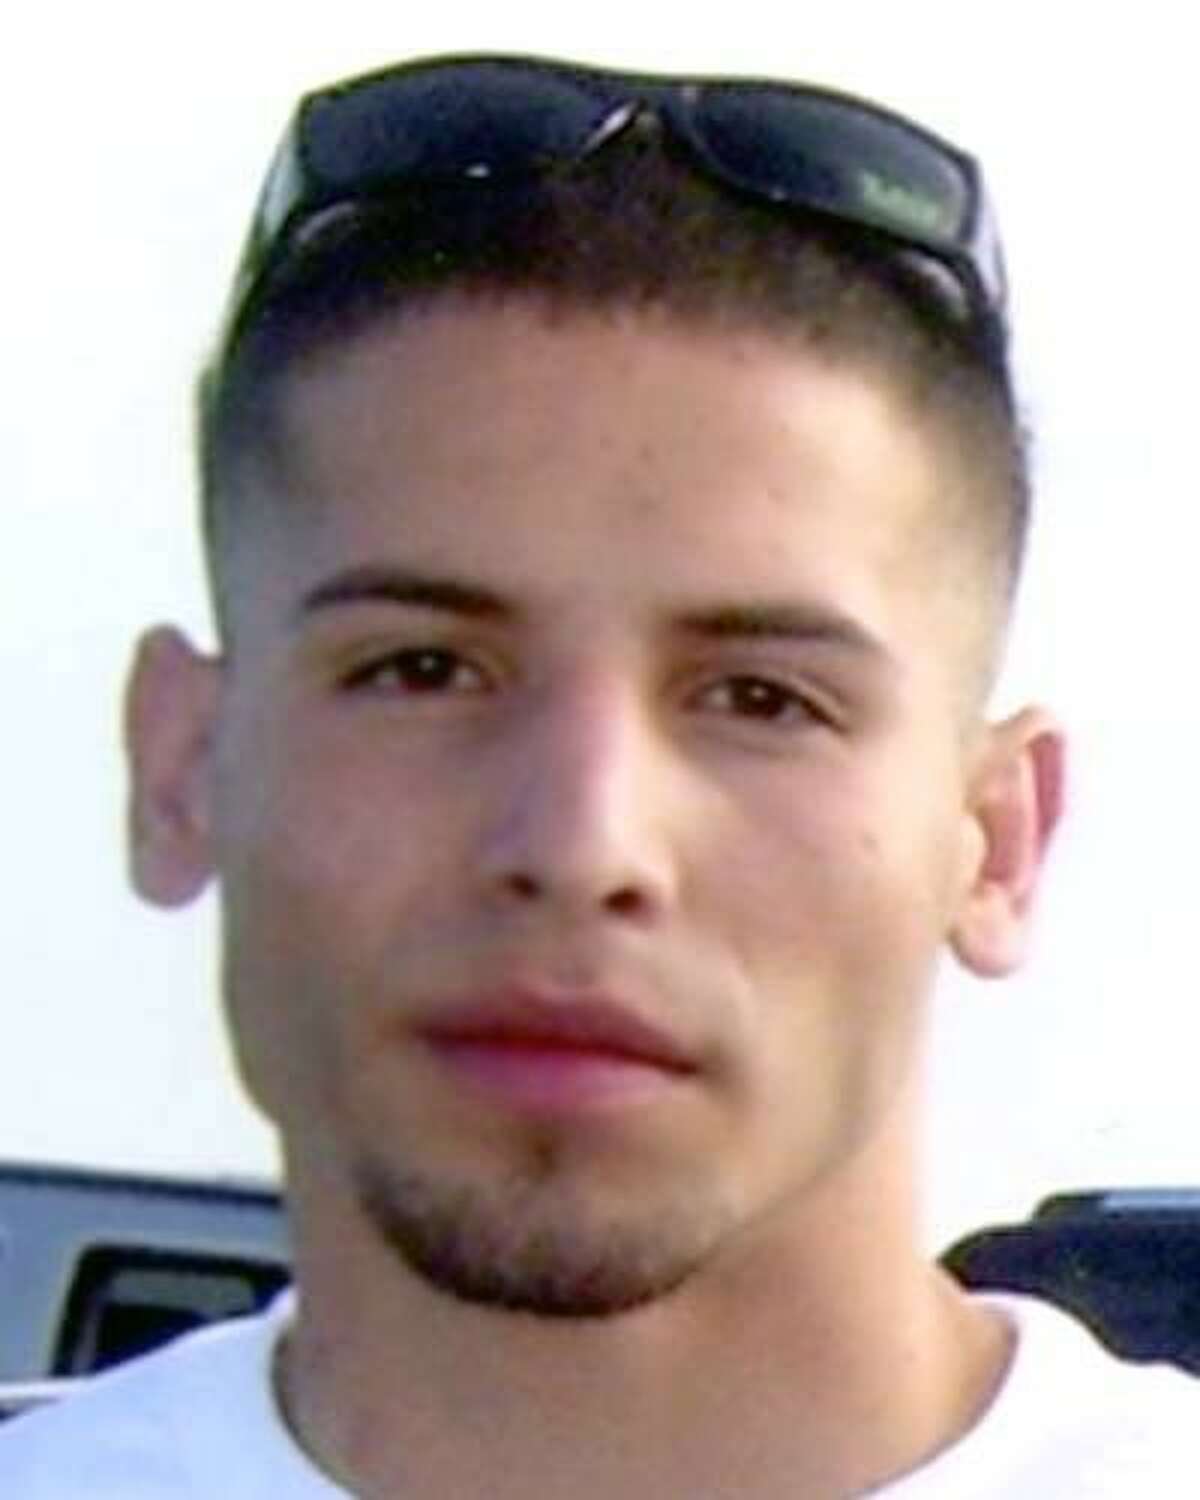 Ryan Esparza went missing on June 14, 2007. Anyone with information on his disappearance is asked to call the Pasadena Police Department at 713-477-1221, or Crime Stoppers at 713-222-TIPS.